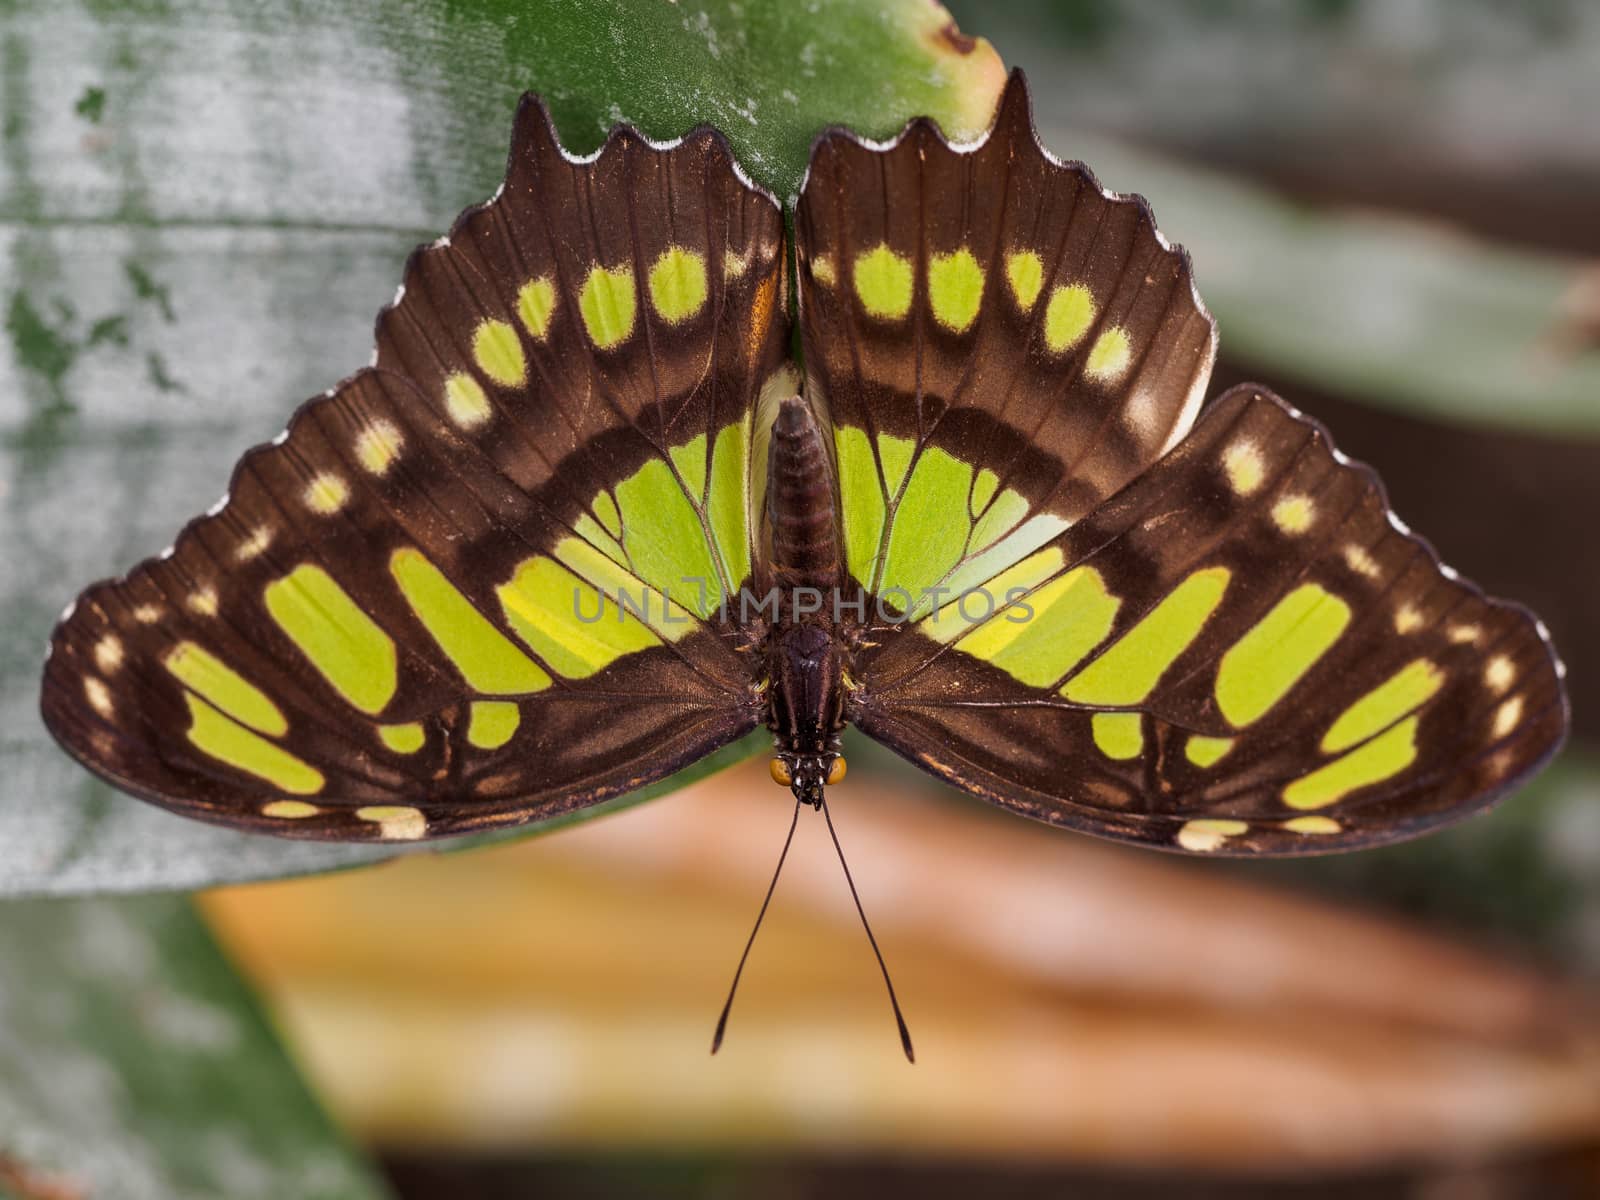 Wingspan view of the malachite butterfly